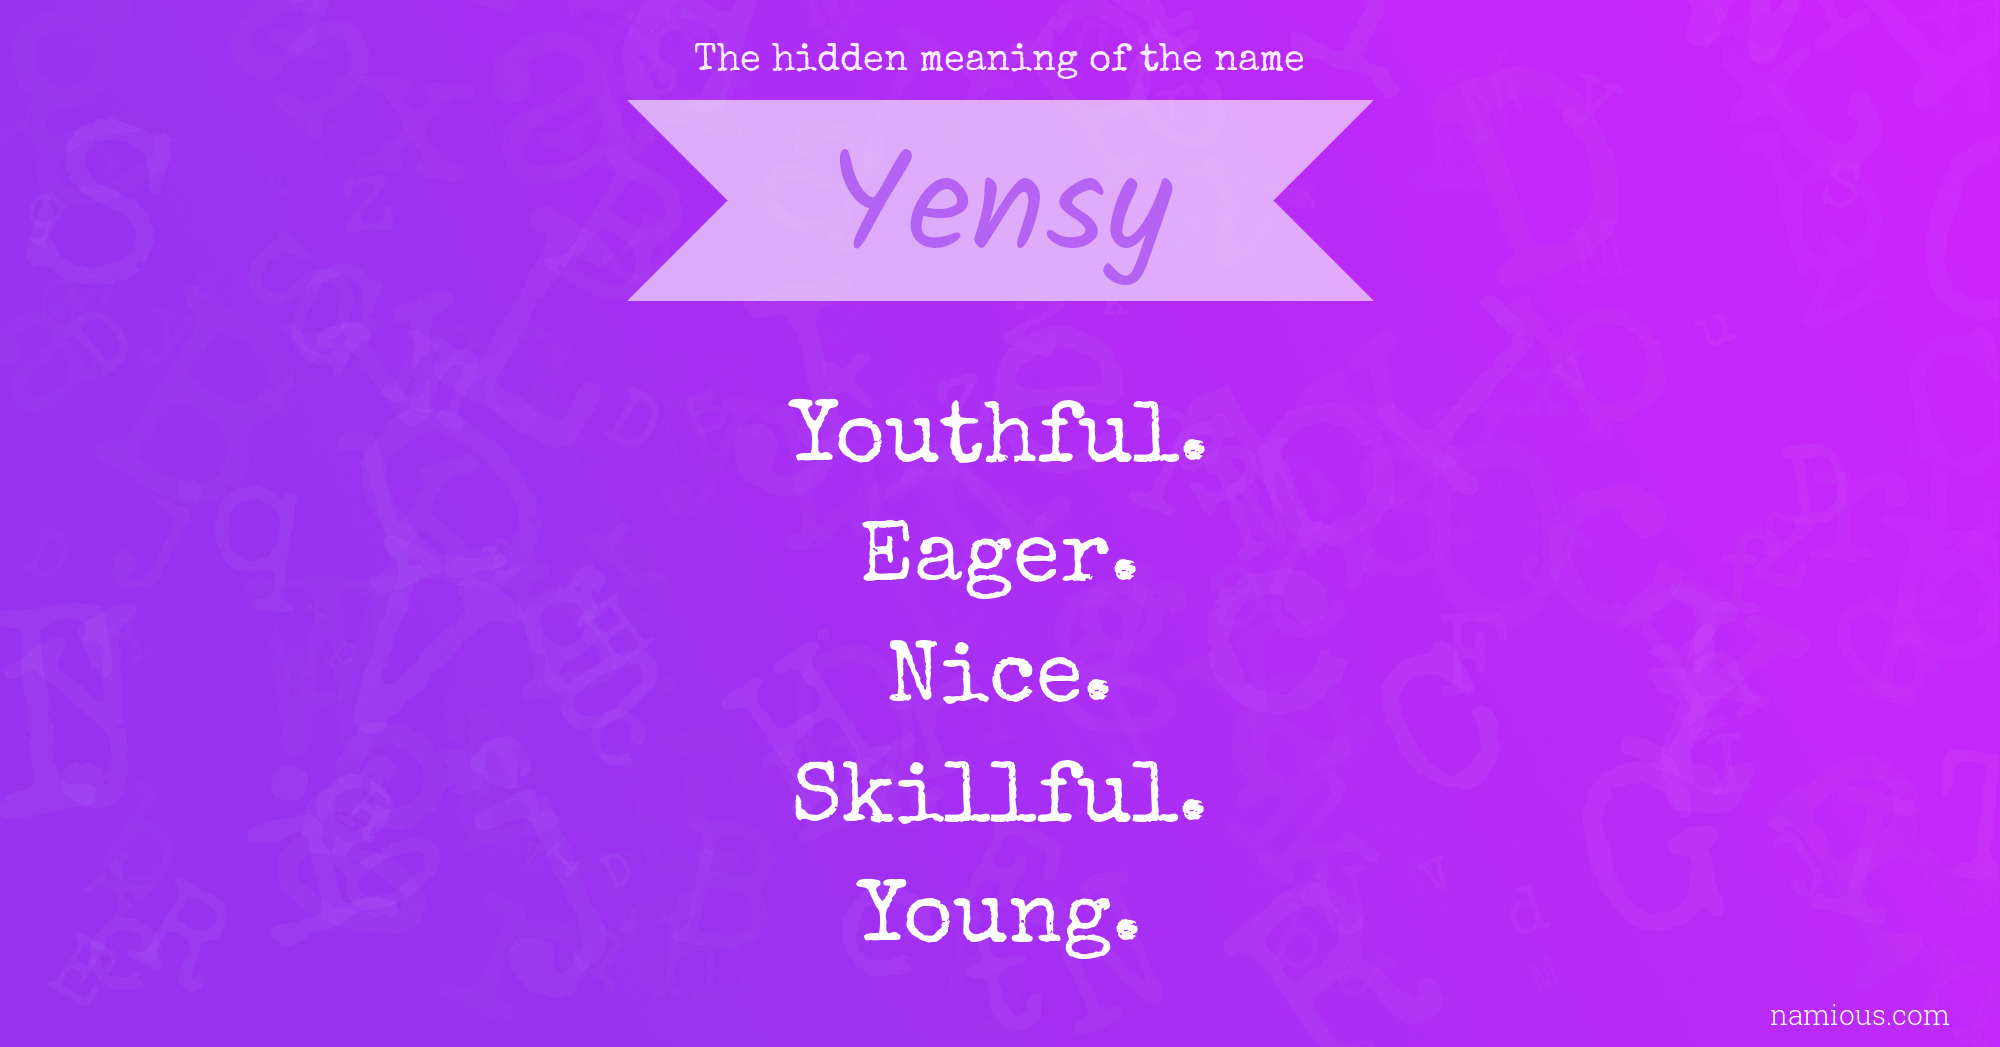 The hidden meaning of the name Yensy